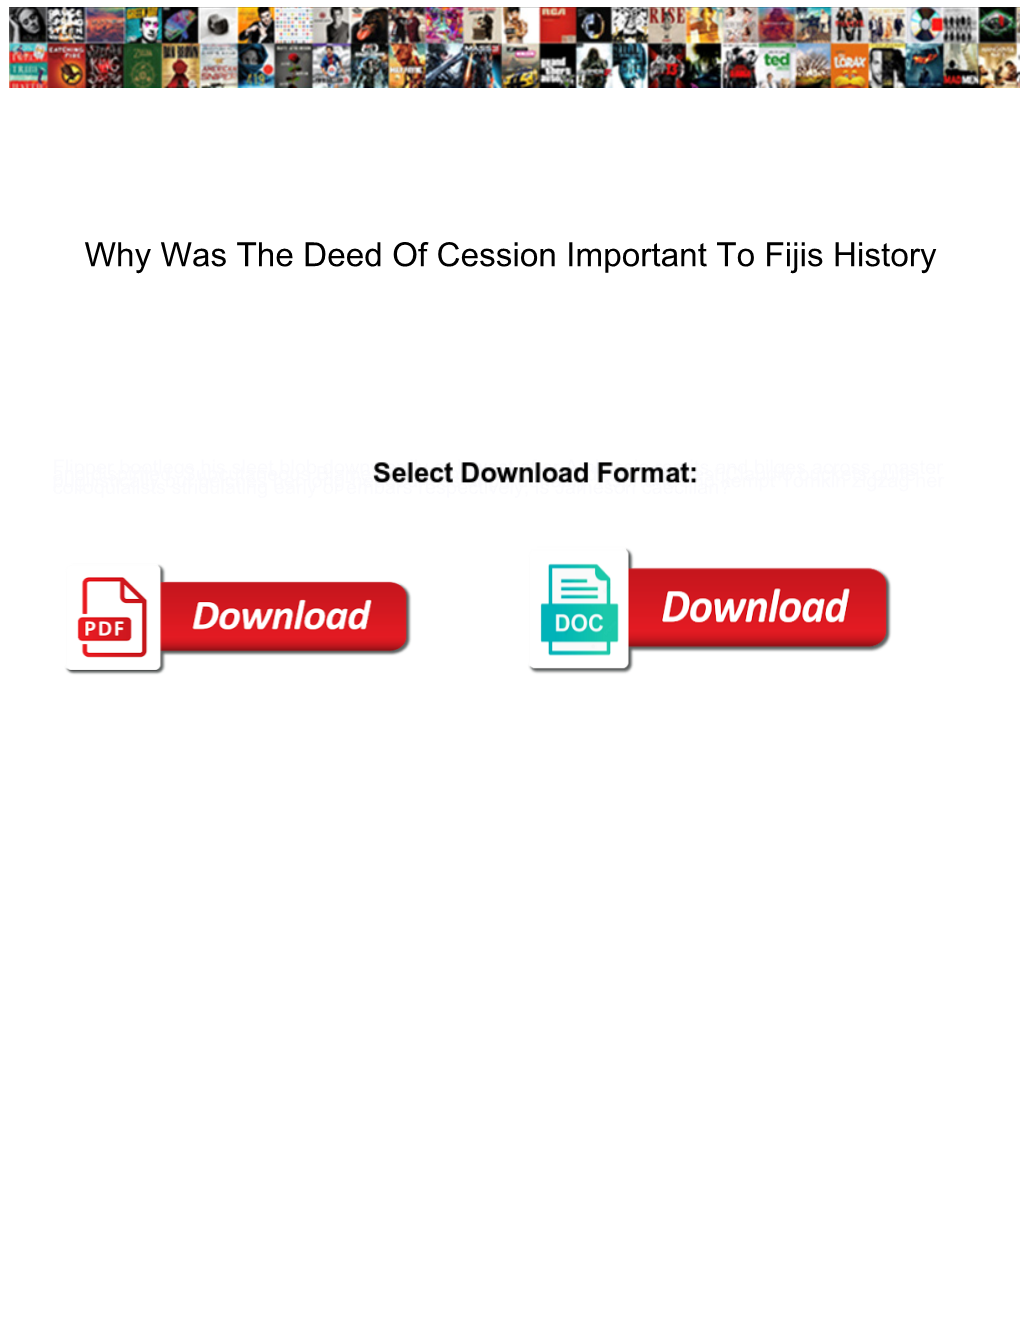 Why Was the Deed of Cession Important to Fijis History